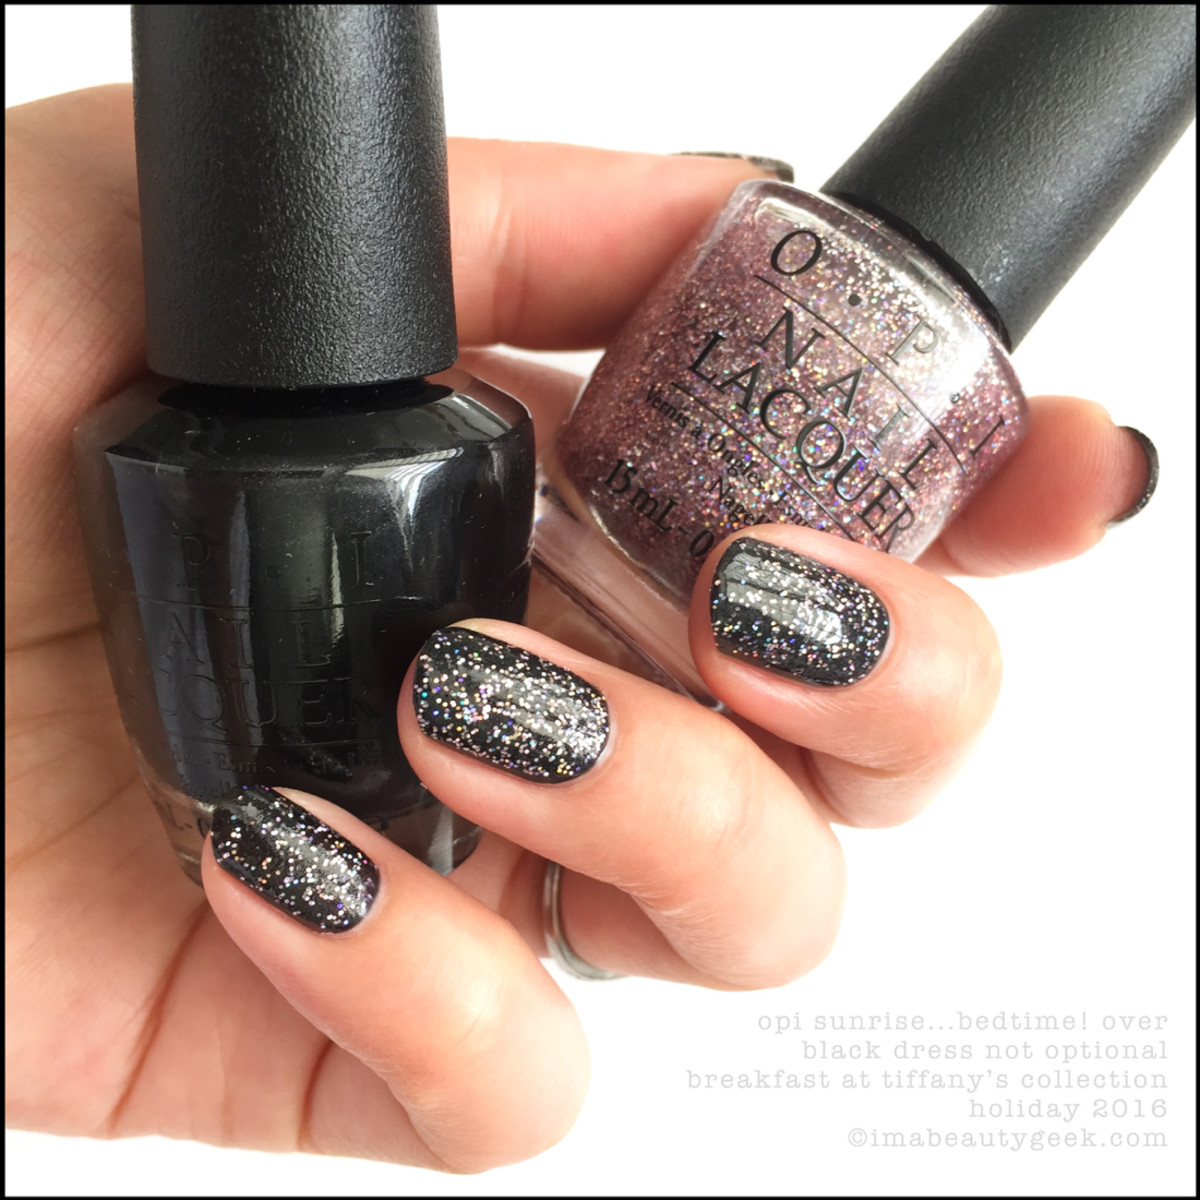 OPI Sunrise Bedtime over Black Dress Not Optional_OPI Breakfast at Tiffanys Collection Swatches Review Holiday 2016